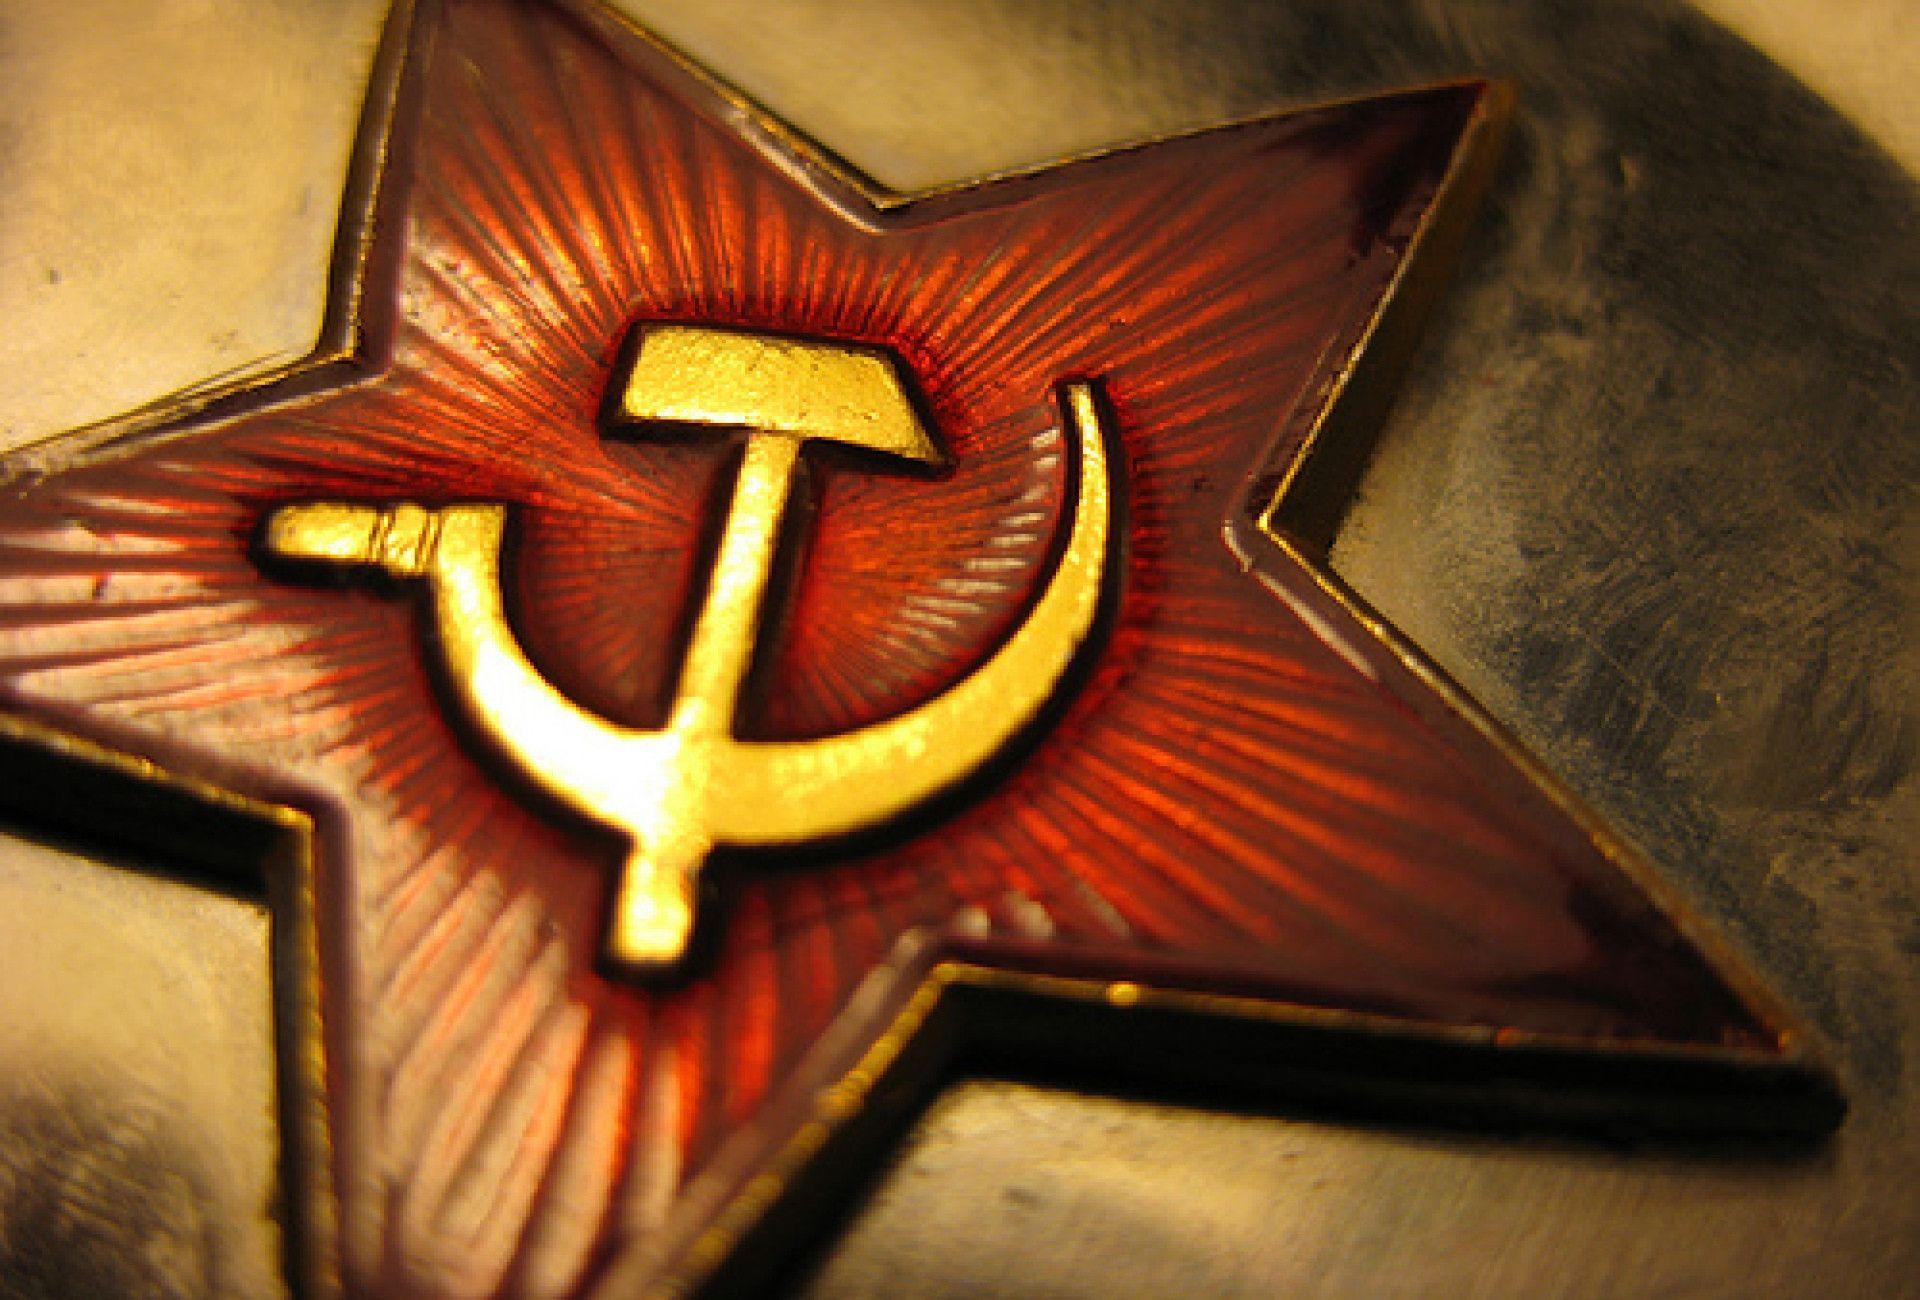 Wallpaper For > Hammer And Sickle Wallpaper